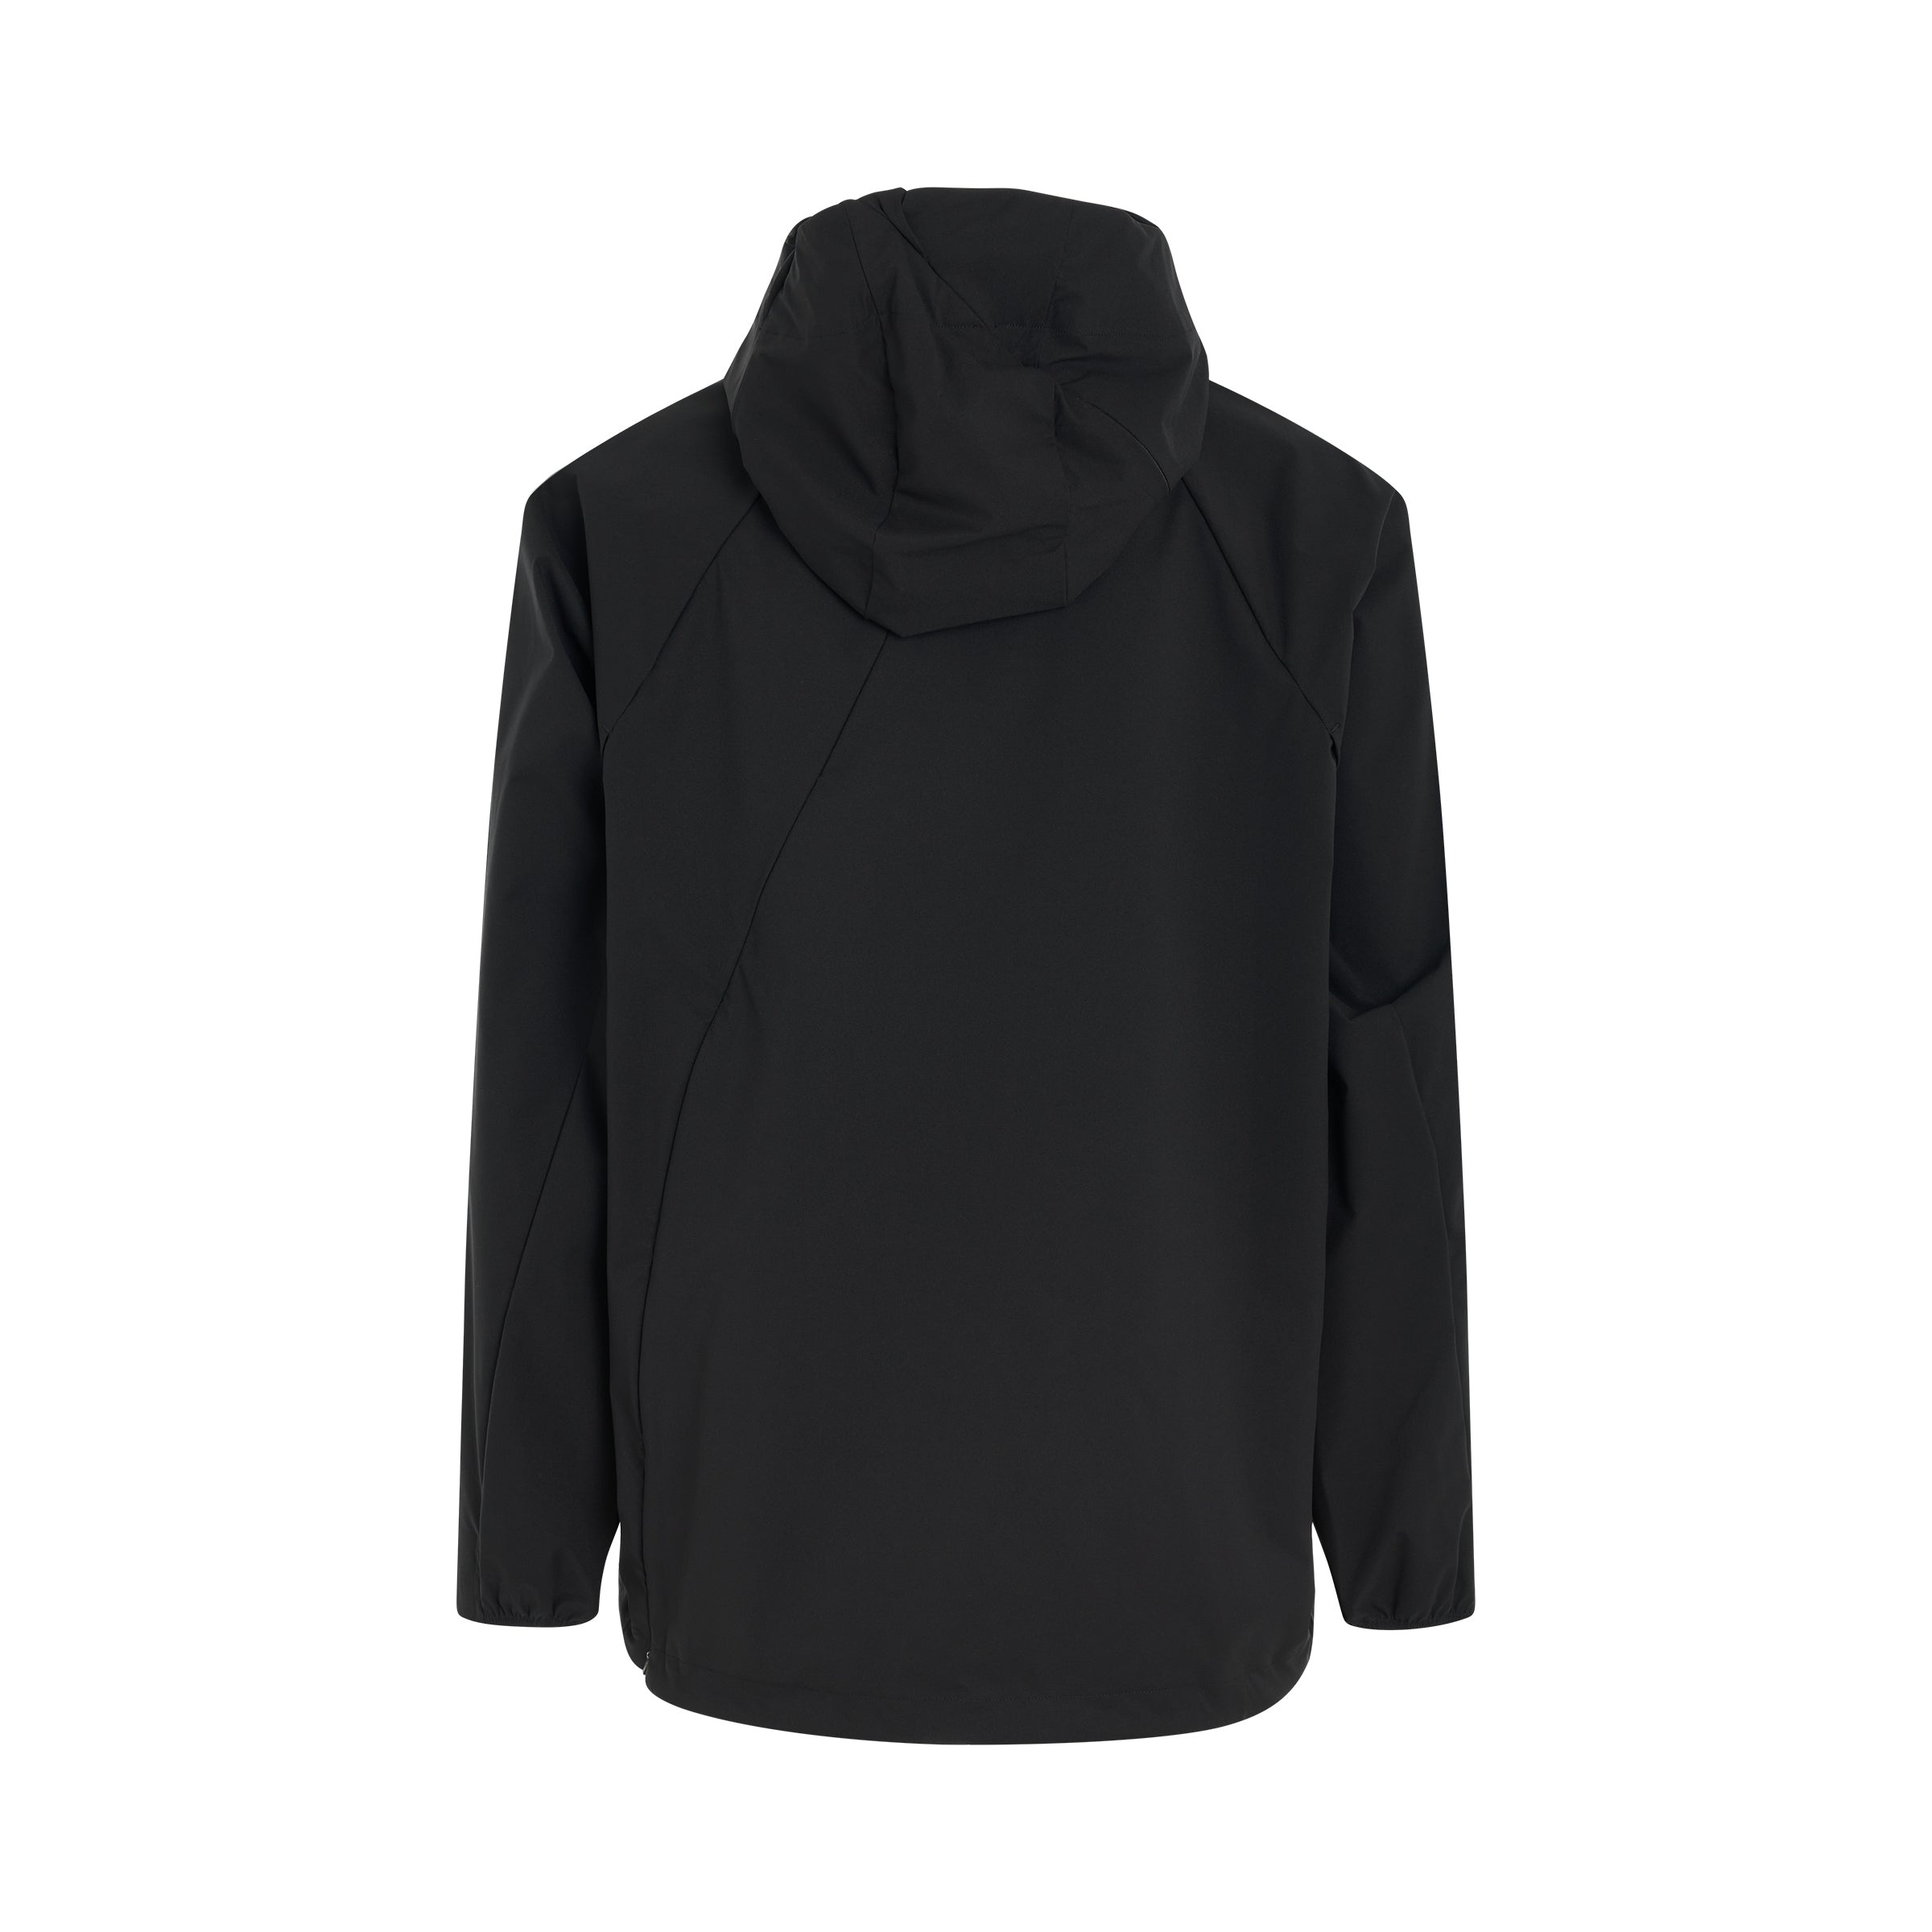 6.0 Technical Jacket (Center) in Black - 4